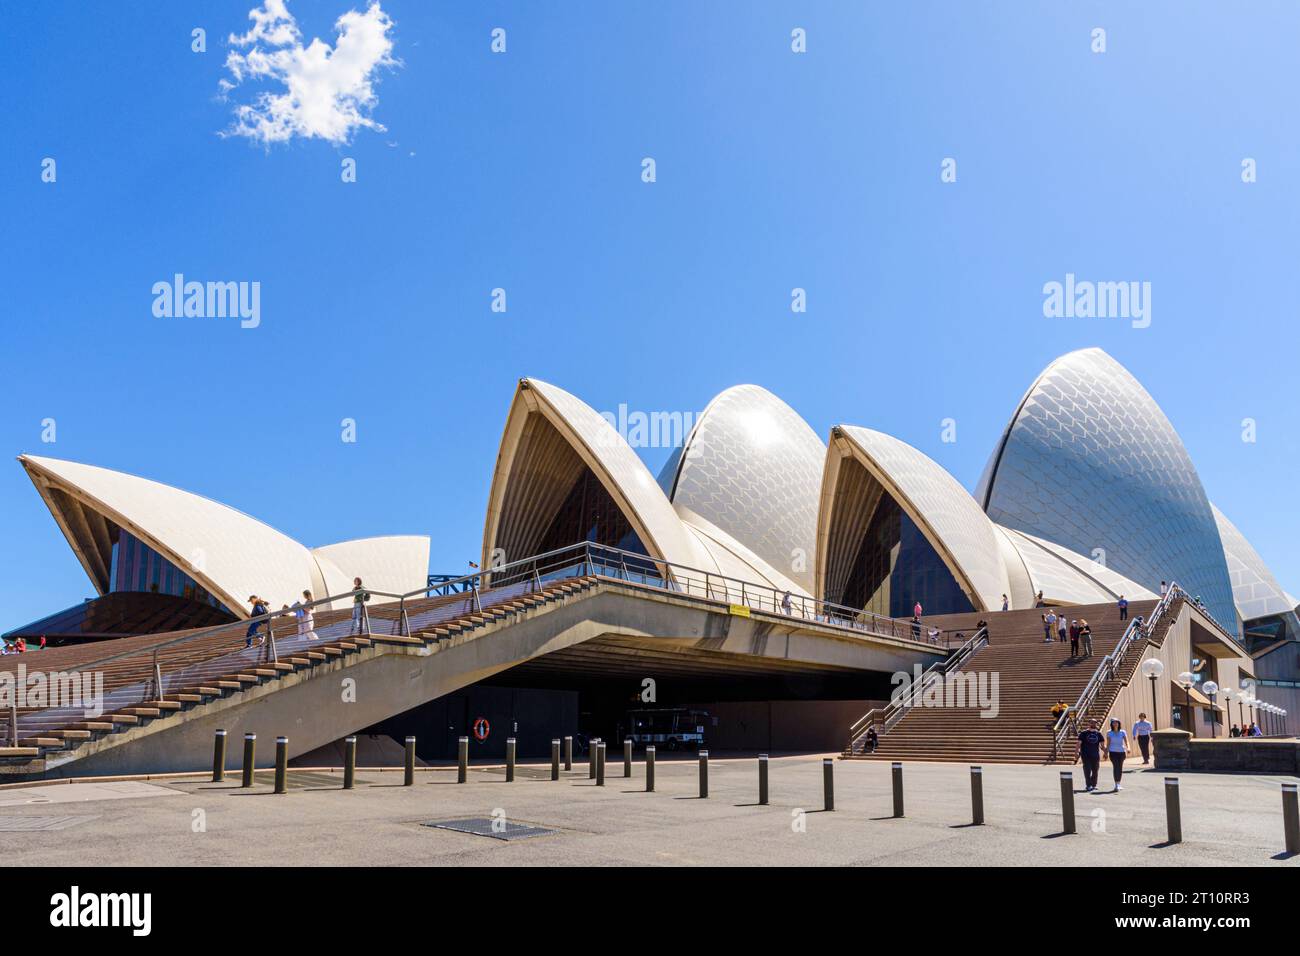 Steps up to the front of the iconic Sydney Opera House on Bennelong Point, Sydney, New South Wales, Australia Stock Photo